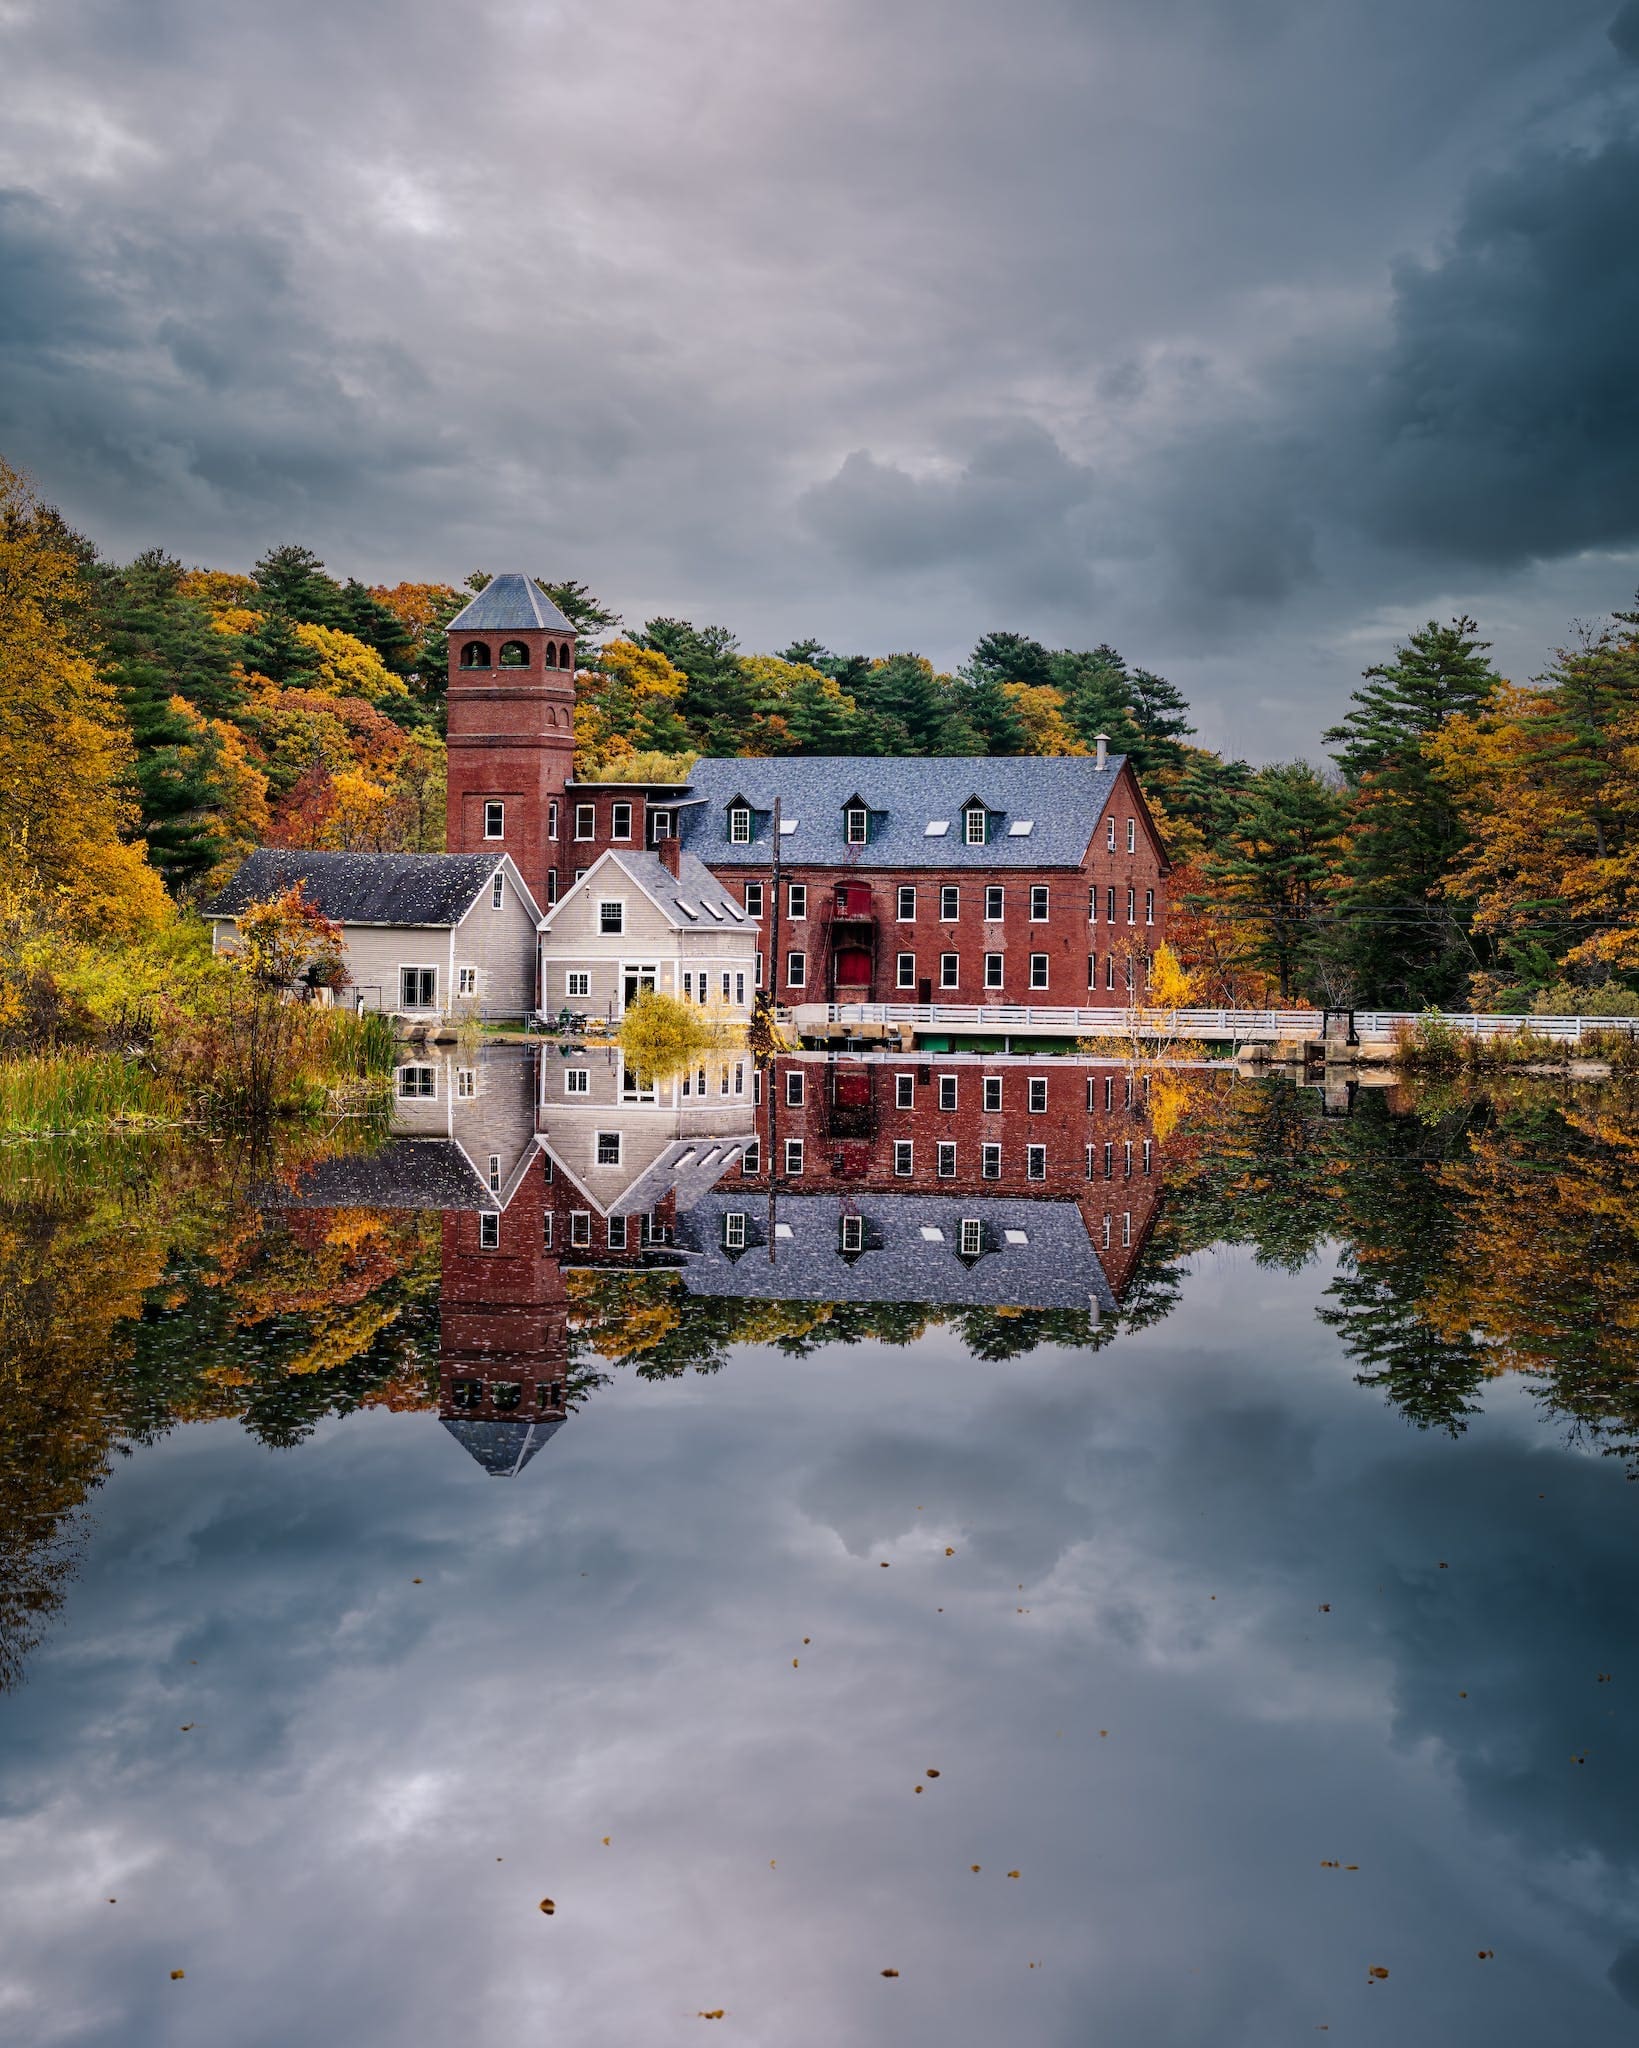 Peaceful lake reflecting aged houses and lush autumn trees under overcast sky